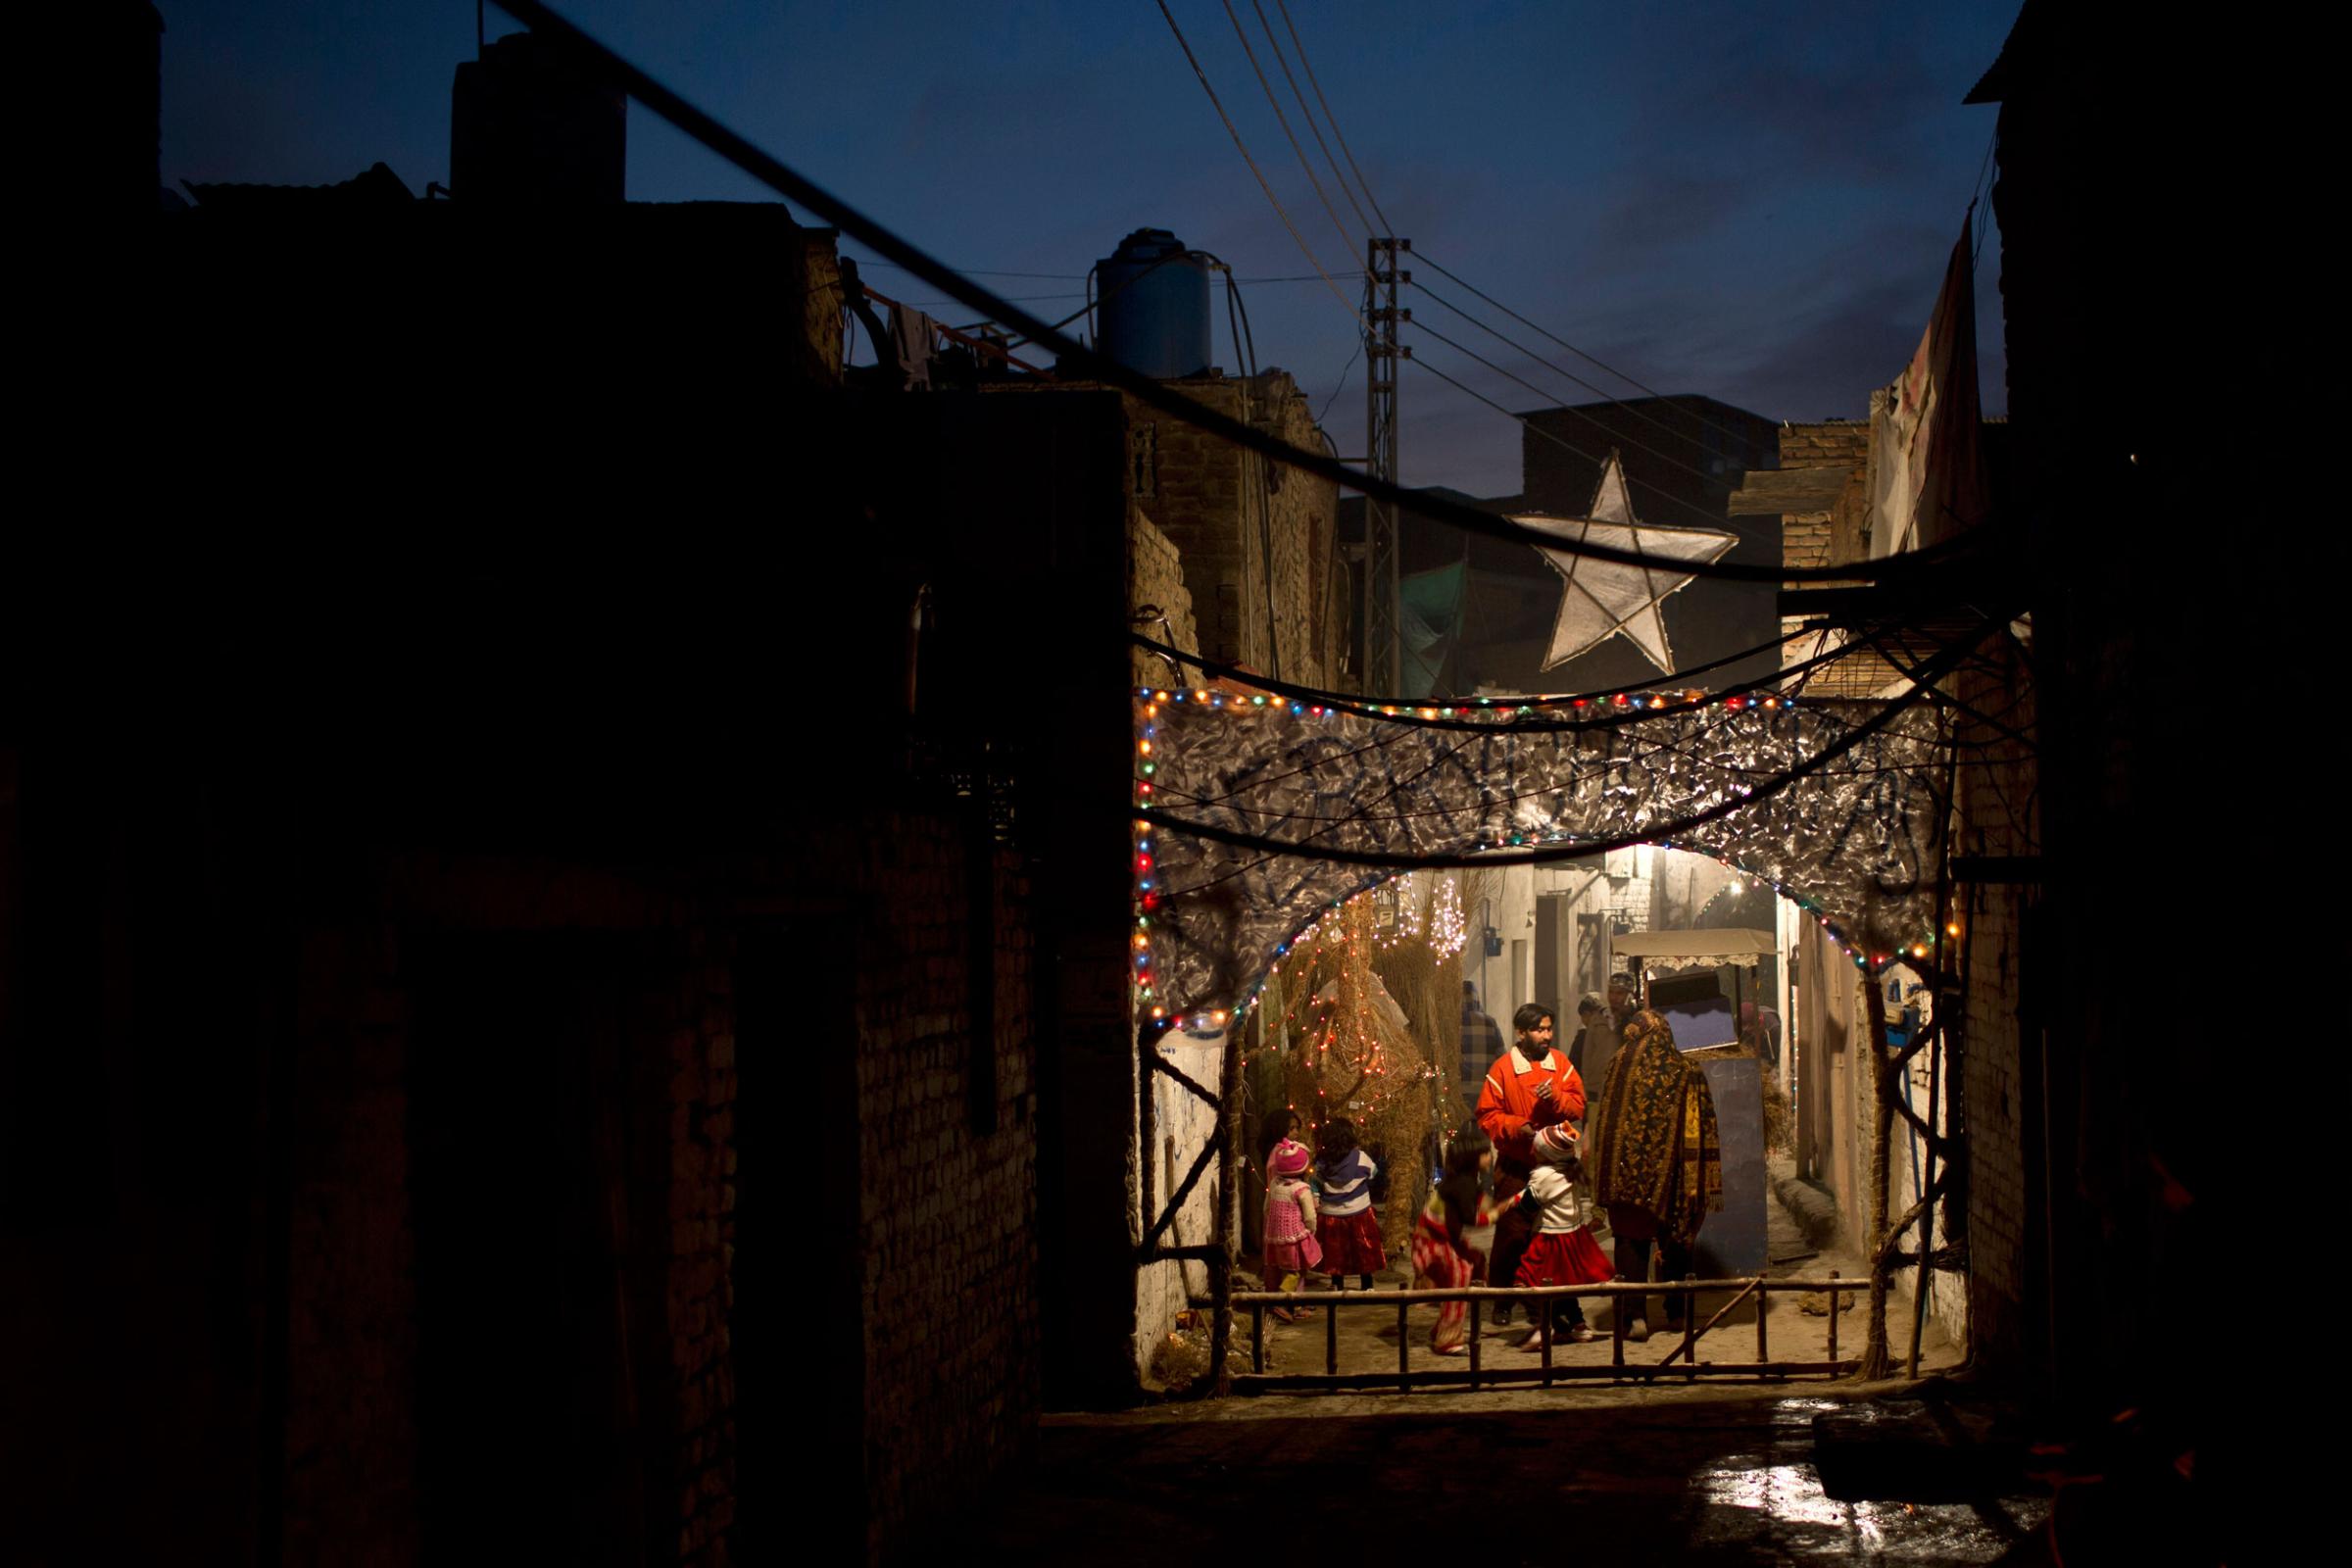 Pakistani Christians gather in an alley of a Christian neighborhood decorated with festive lights for Christmas in Islamabad, Pakistan on Dec. 24, 2014.